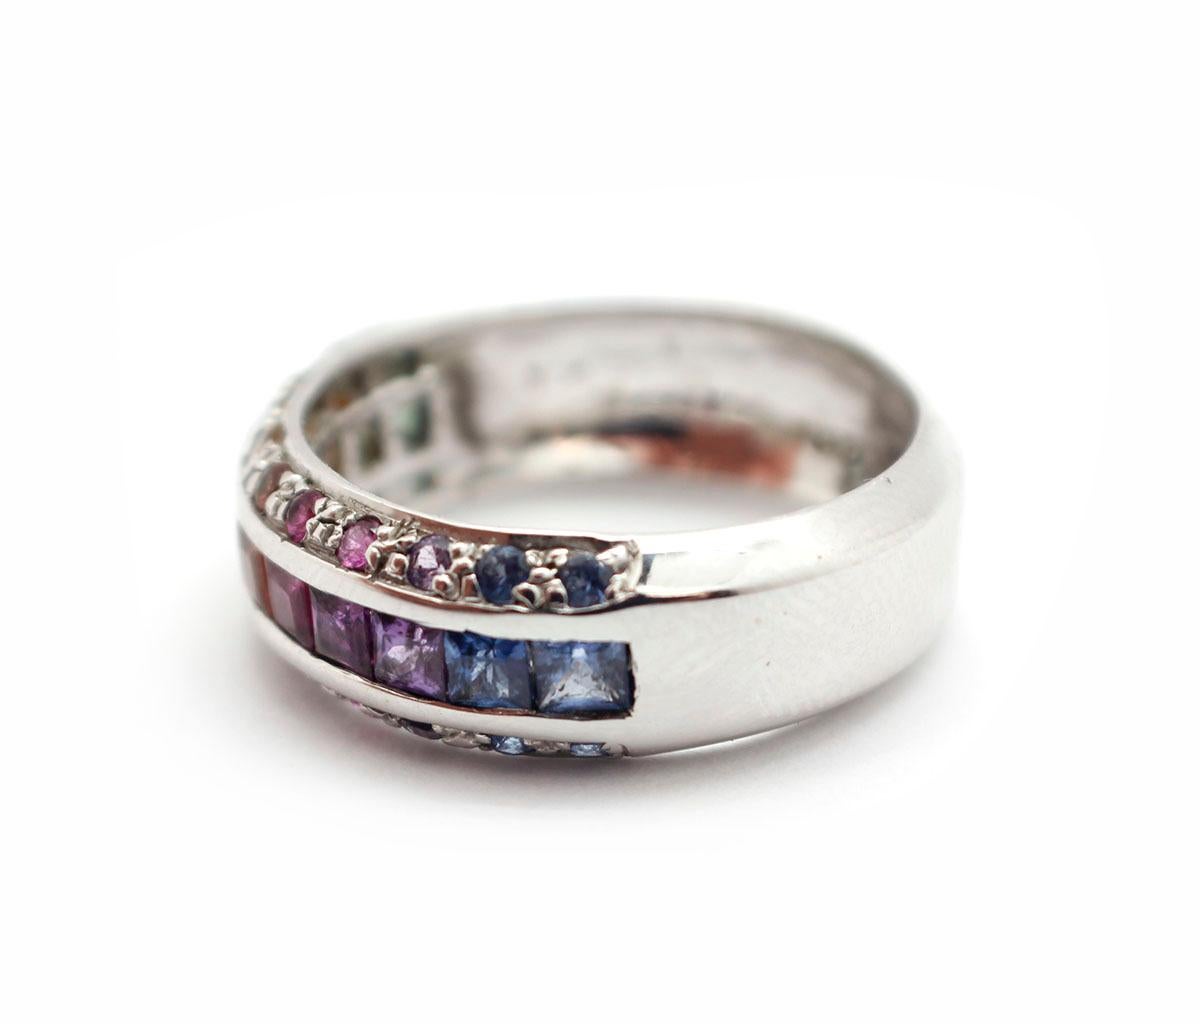 This gorgeous 14k white gold rainbow sapphire ring is amazing! The ring features a total of 1.60ct princess cut and round cut sapphire stones that range in color from green to blue. The ring weighs a total of 5.44 grams and is a size 7.
